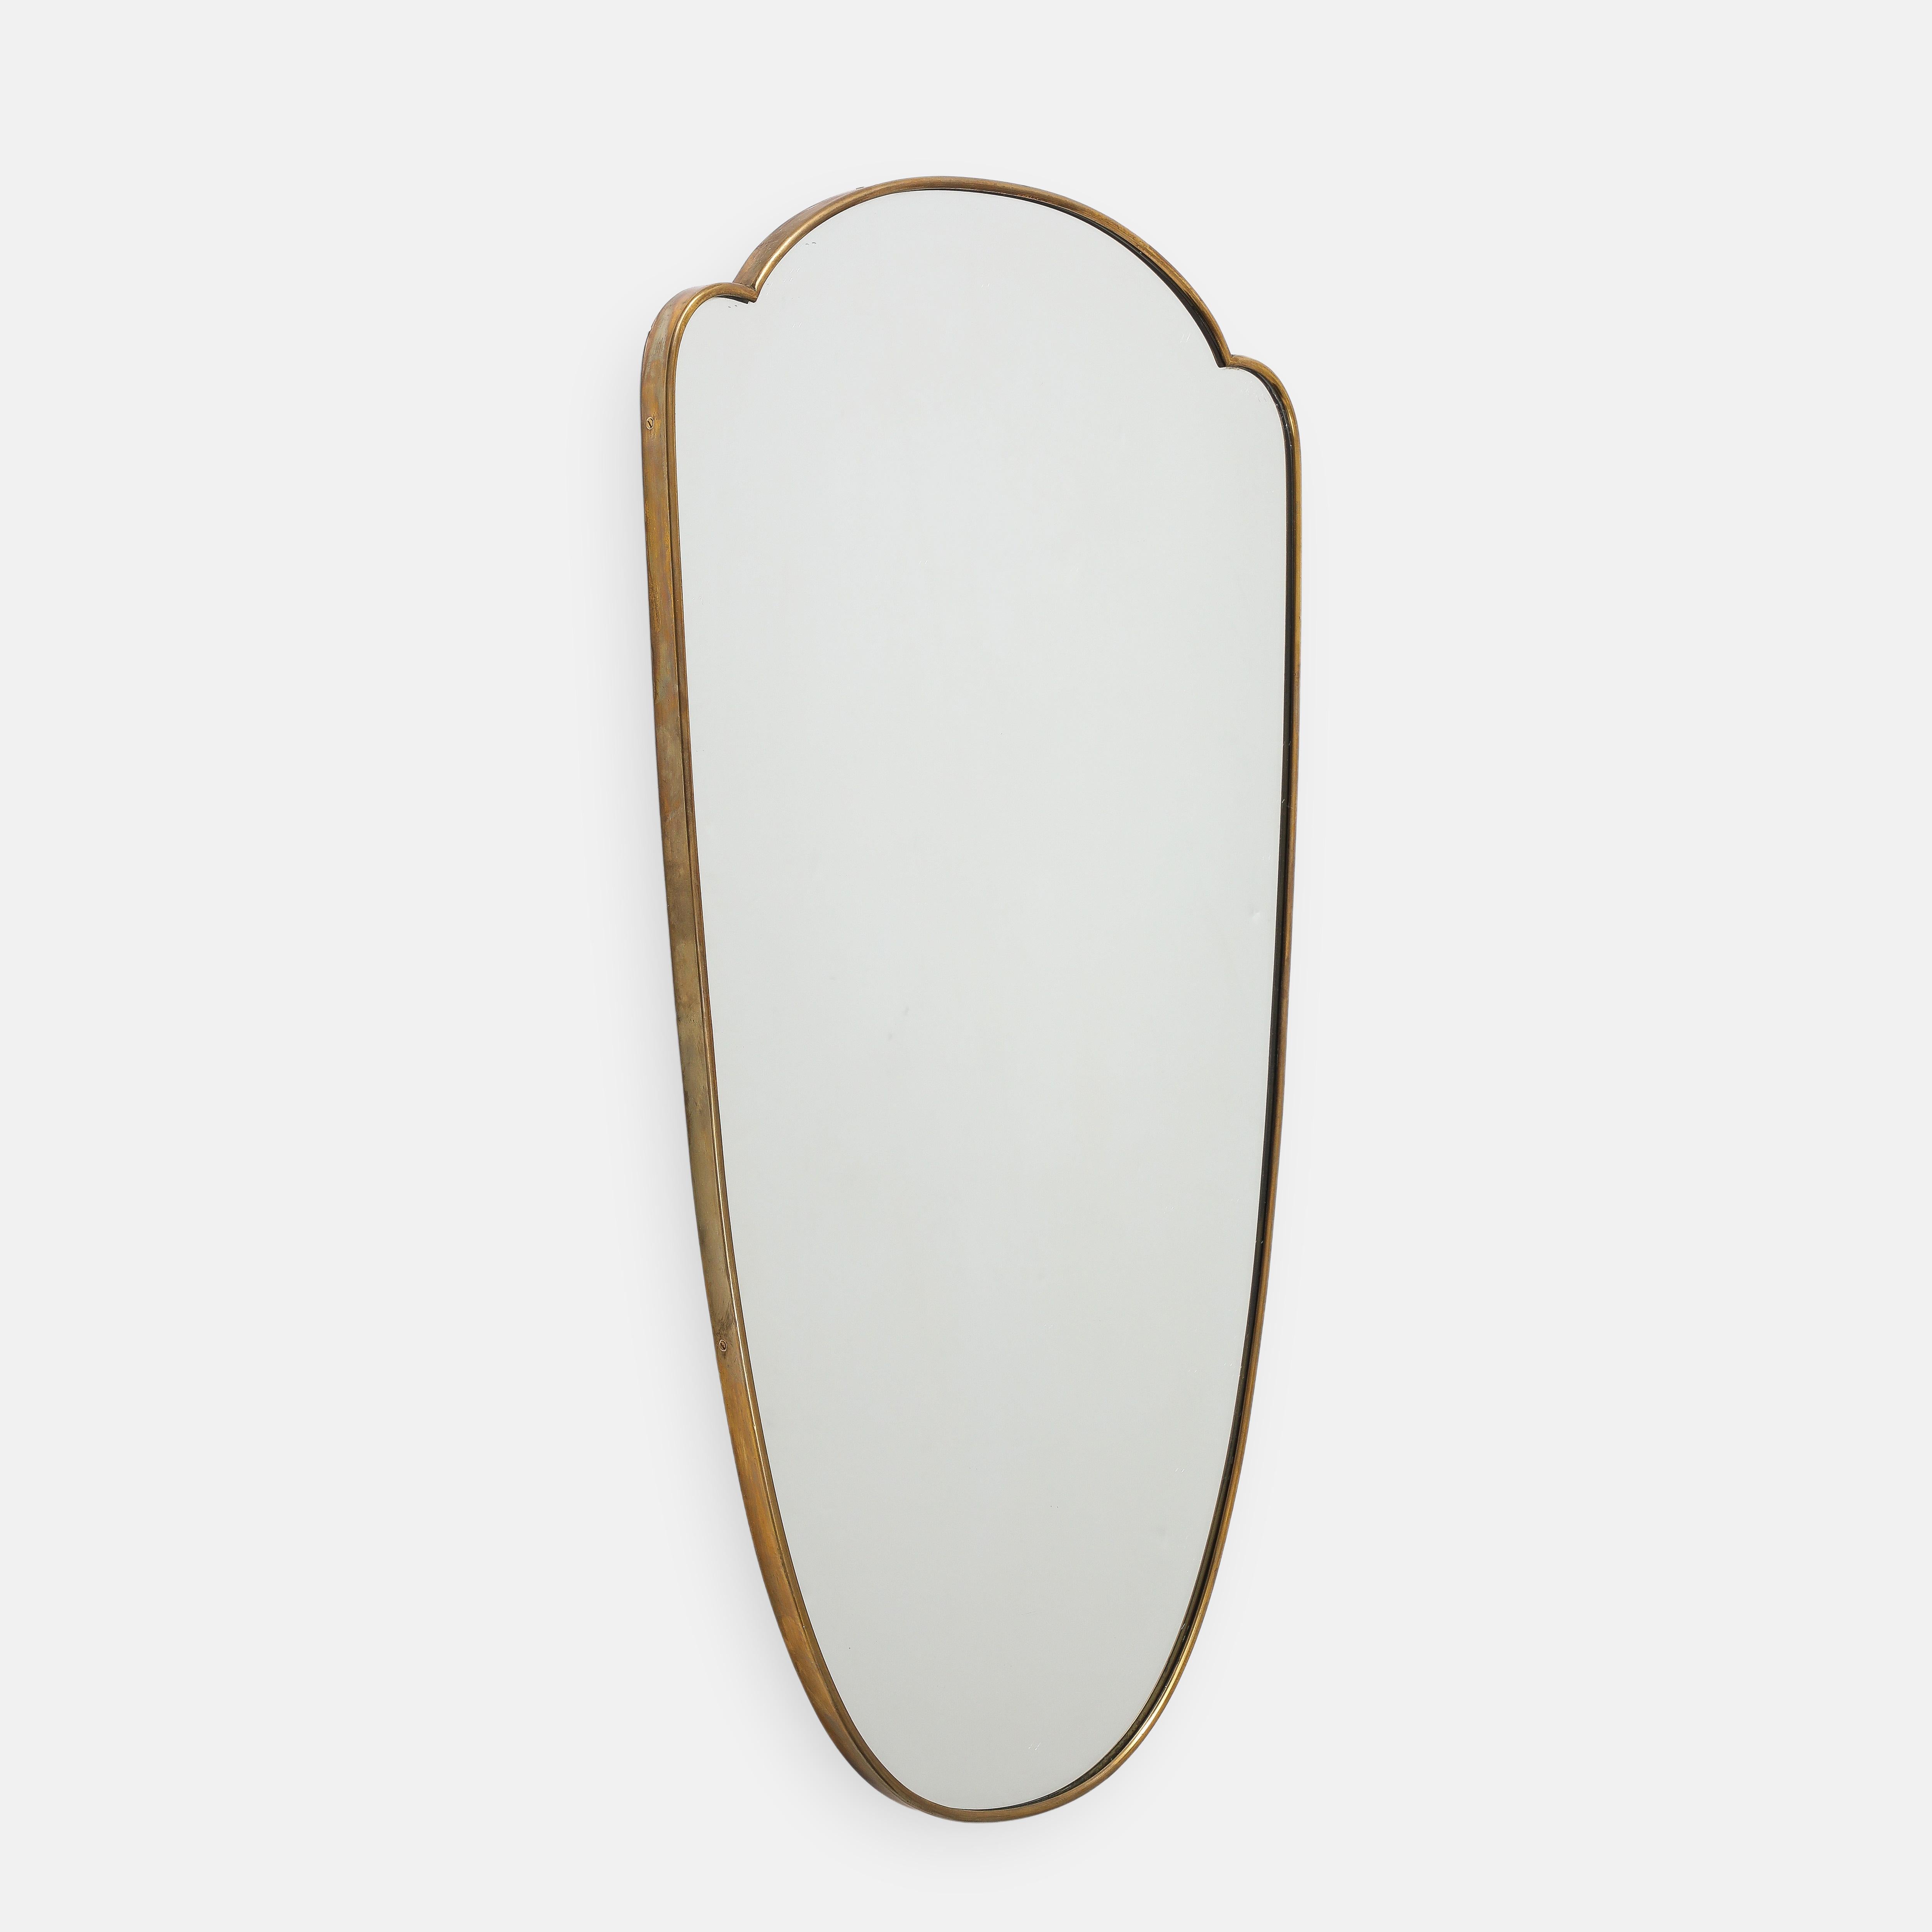 1950s Italian elegant shield shaped brass wall mirror. This original midcentury period mirror has a lovely elongated and curved form and a beautiful rich patina to the brass with wood backing.